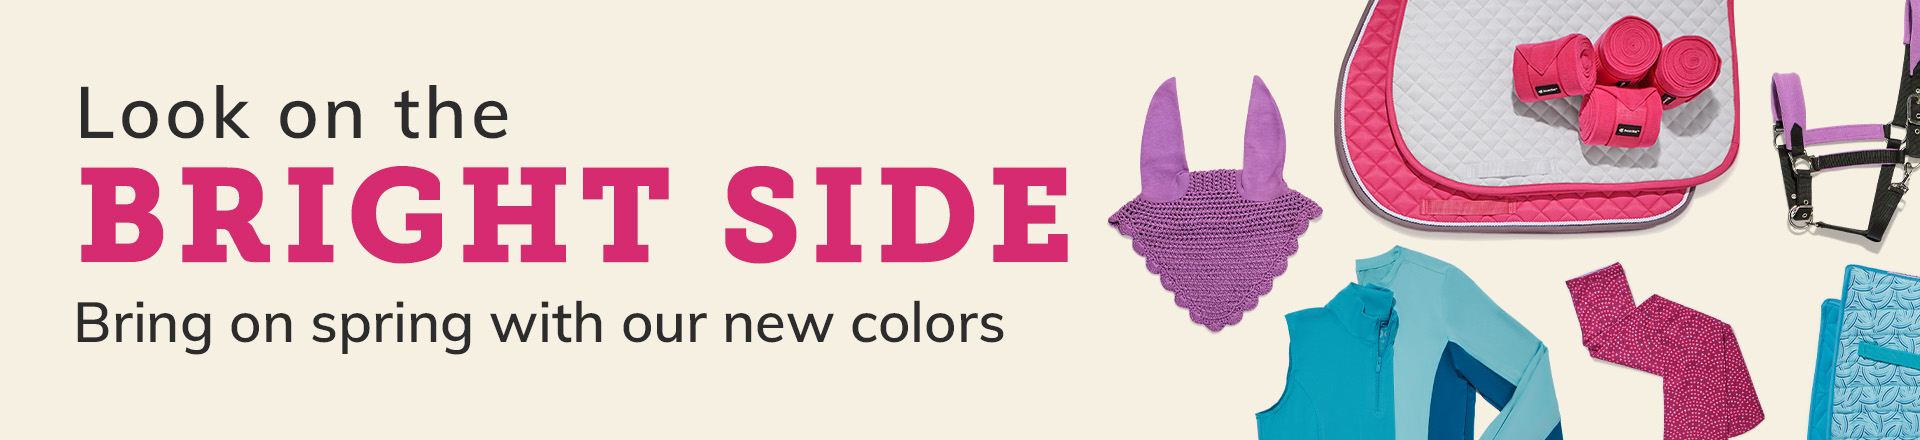 Bring on Spring with our new colors!